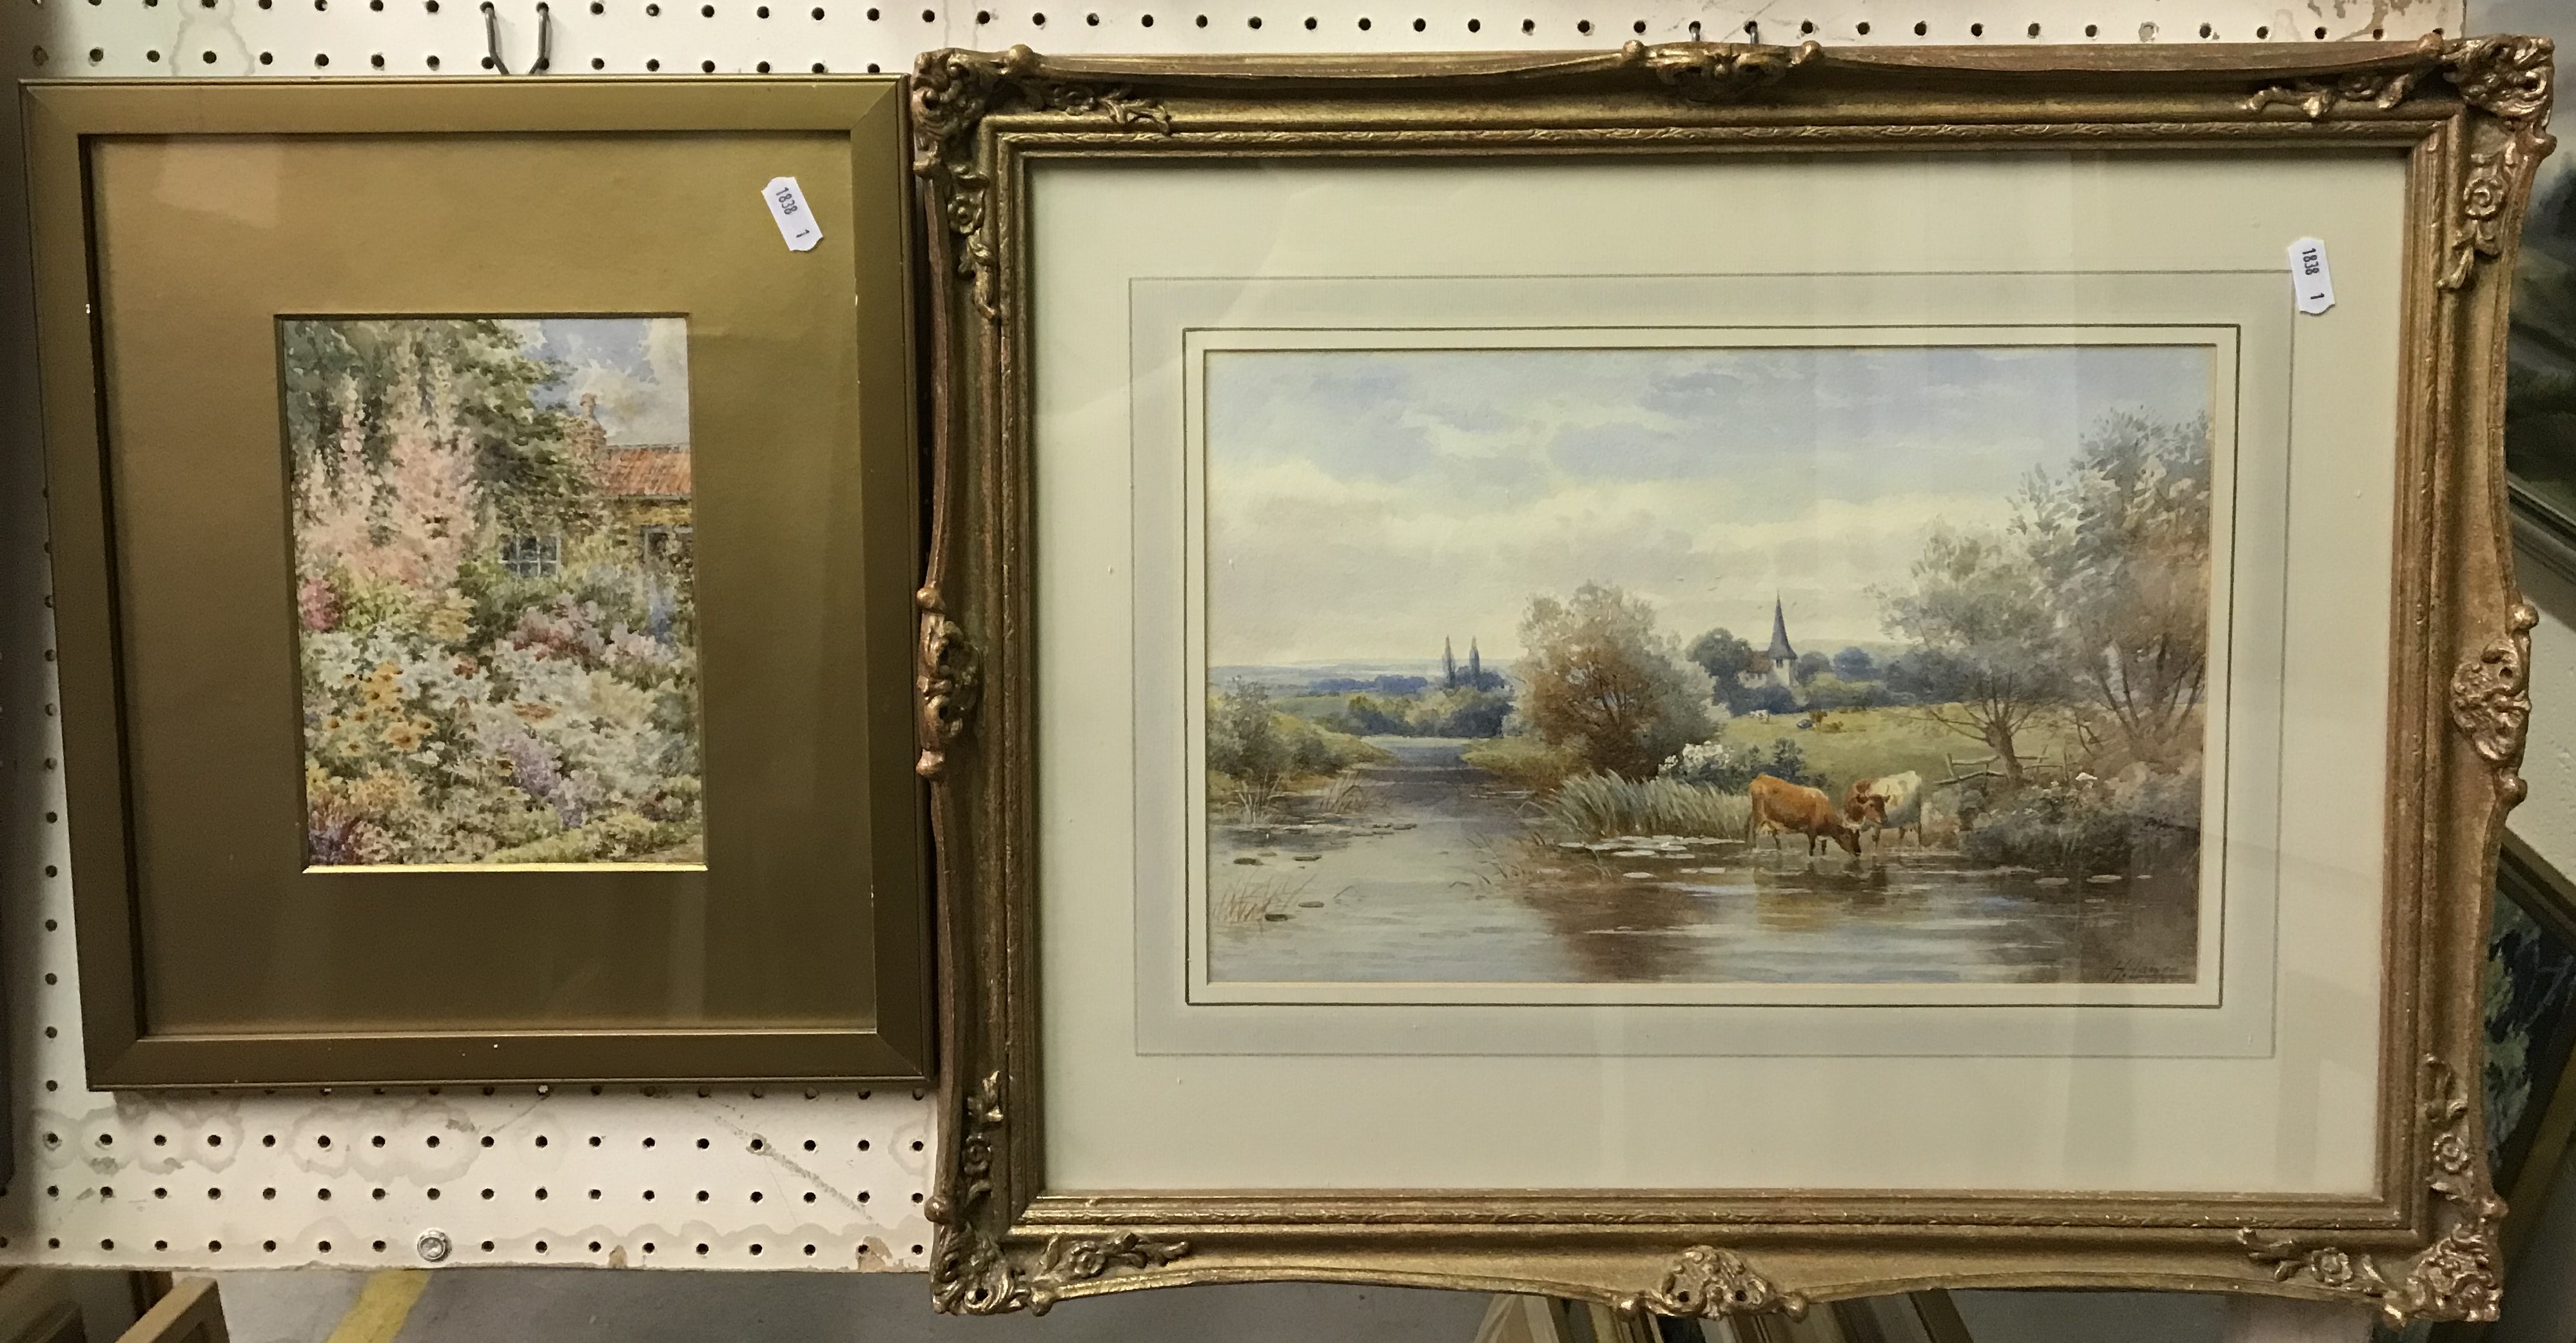 E LAWES "Rural landscape with cows in foreground" watercolour, signed lower right, 22 cm x 34 cm, S.